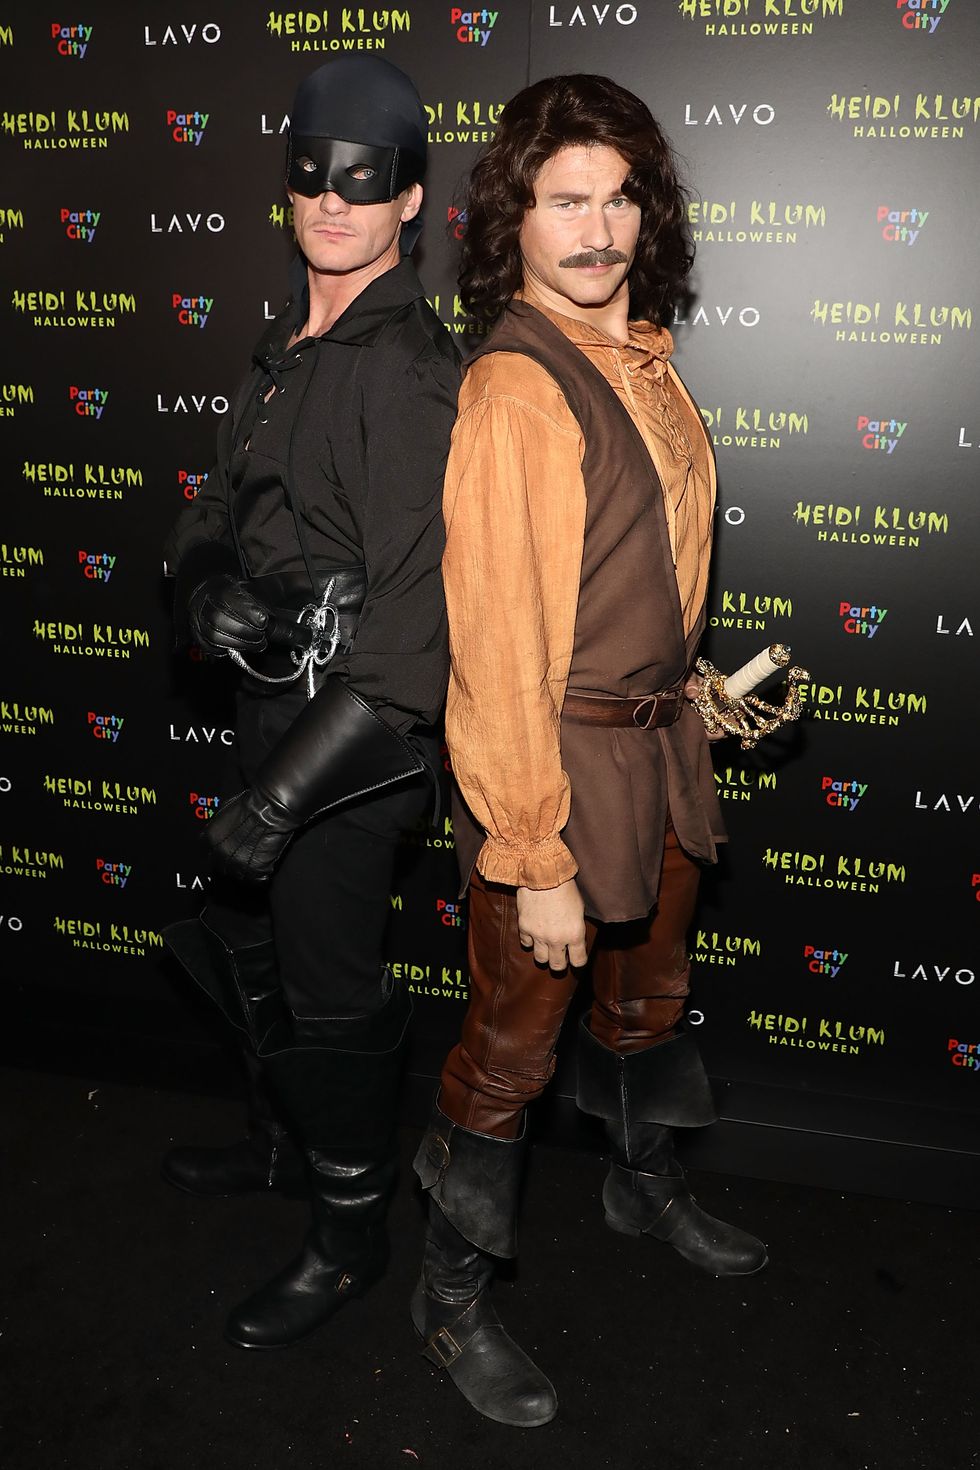 new york, ny october 31 neil patrick harris and david burtka attend heidi klums 19th annual halloween party at lavo on october 31, 2018 in new york city photo by taylor hillfilmmagic